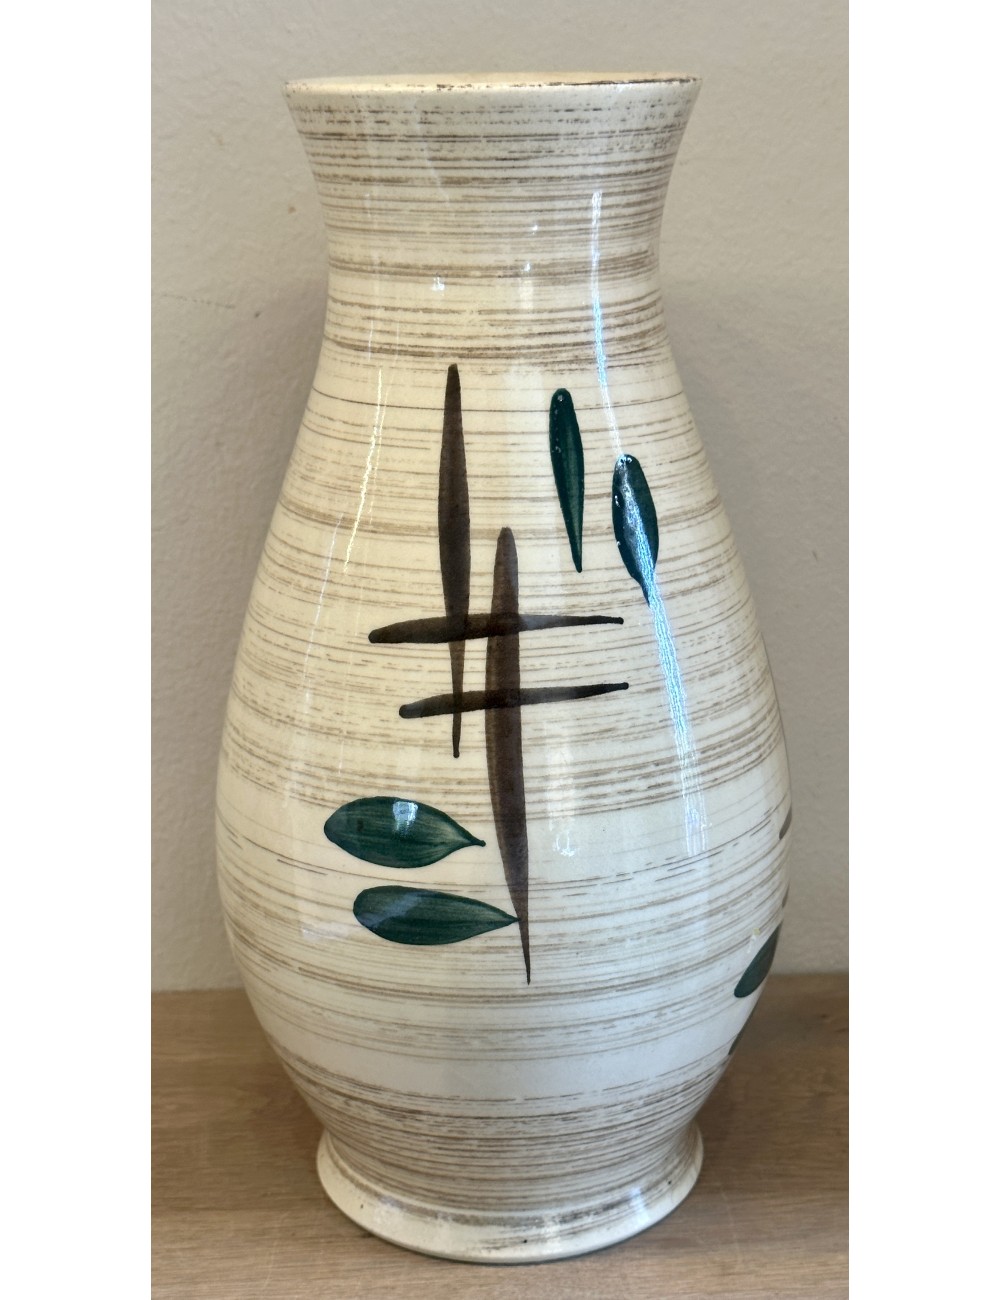 Vase - Bay Keramik - Made in Germany - executed in brown and green abstract decor